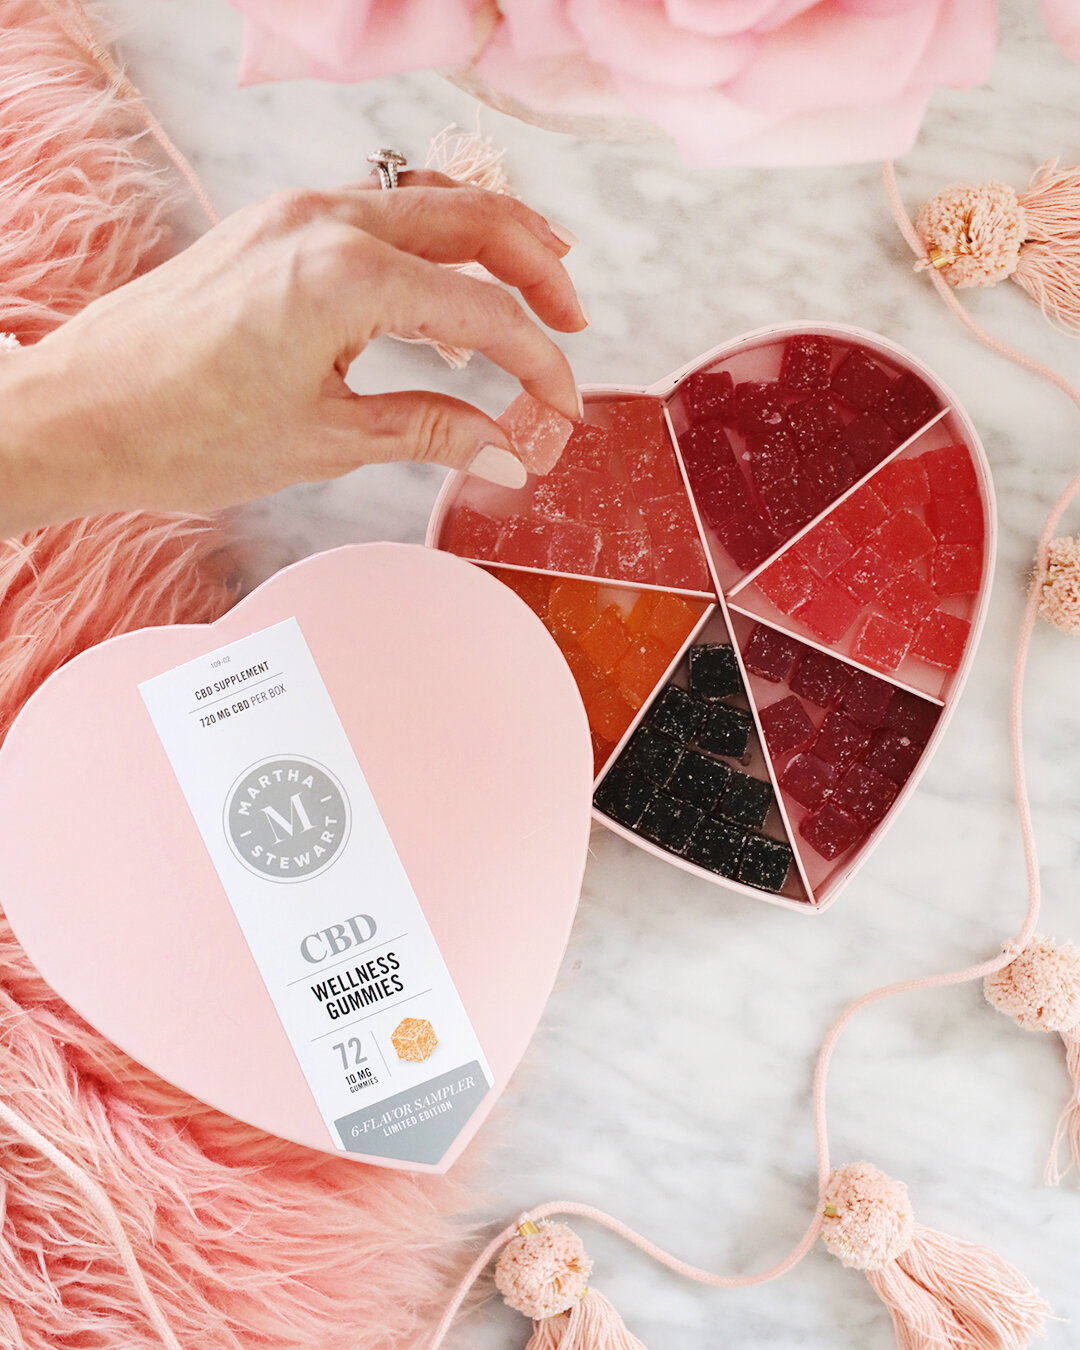    Martha Stewart&nbsp;CBD Wellness Gummies 6 Flavor Sampler ($69.99):    Martha created this beautiful heart shaped gift box, just in time for Valentine’s Day, with flavors inspired from her garden that taste as wonderful as they make you feel. The 